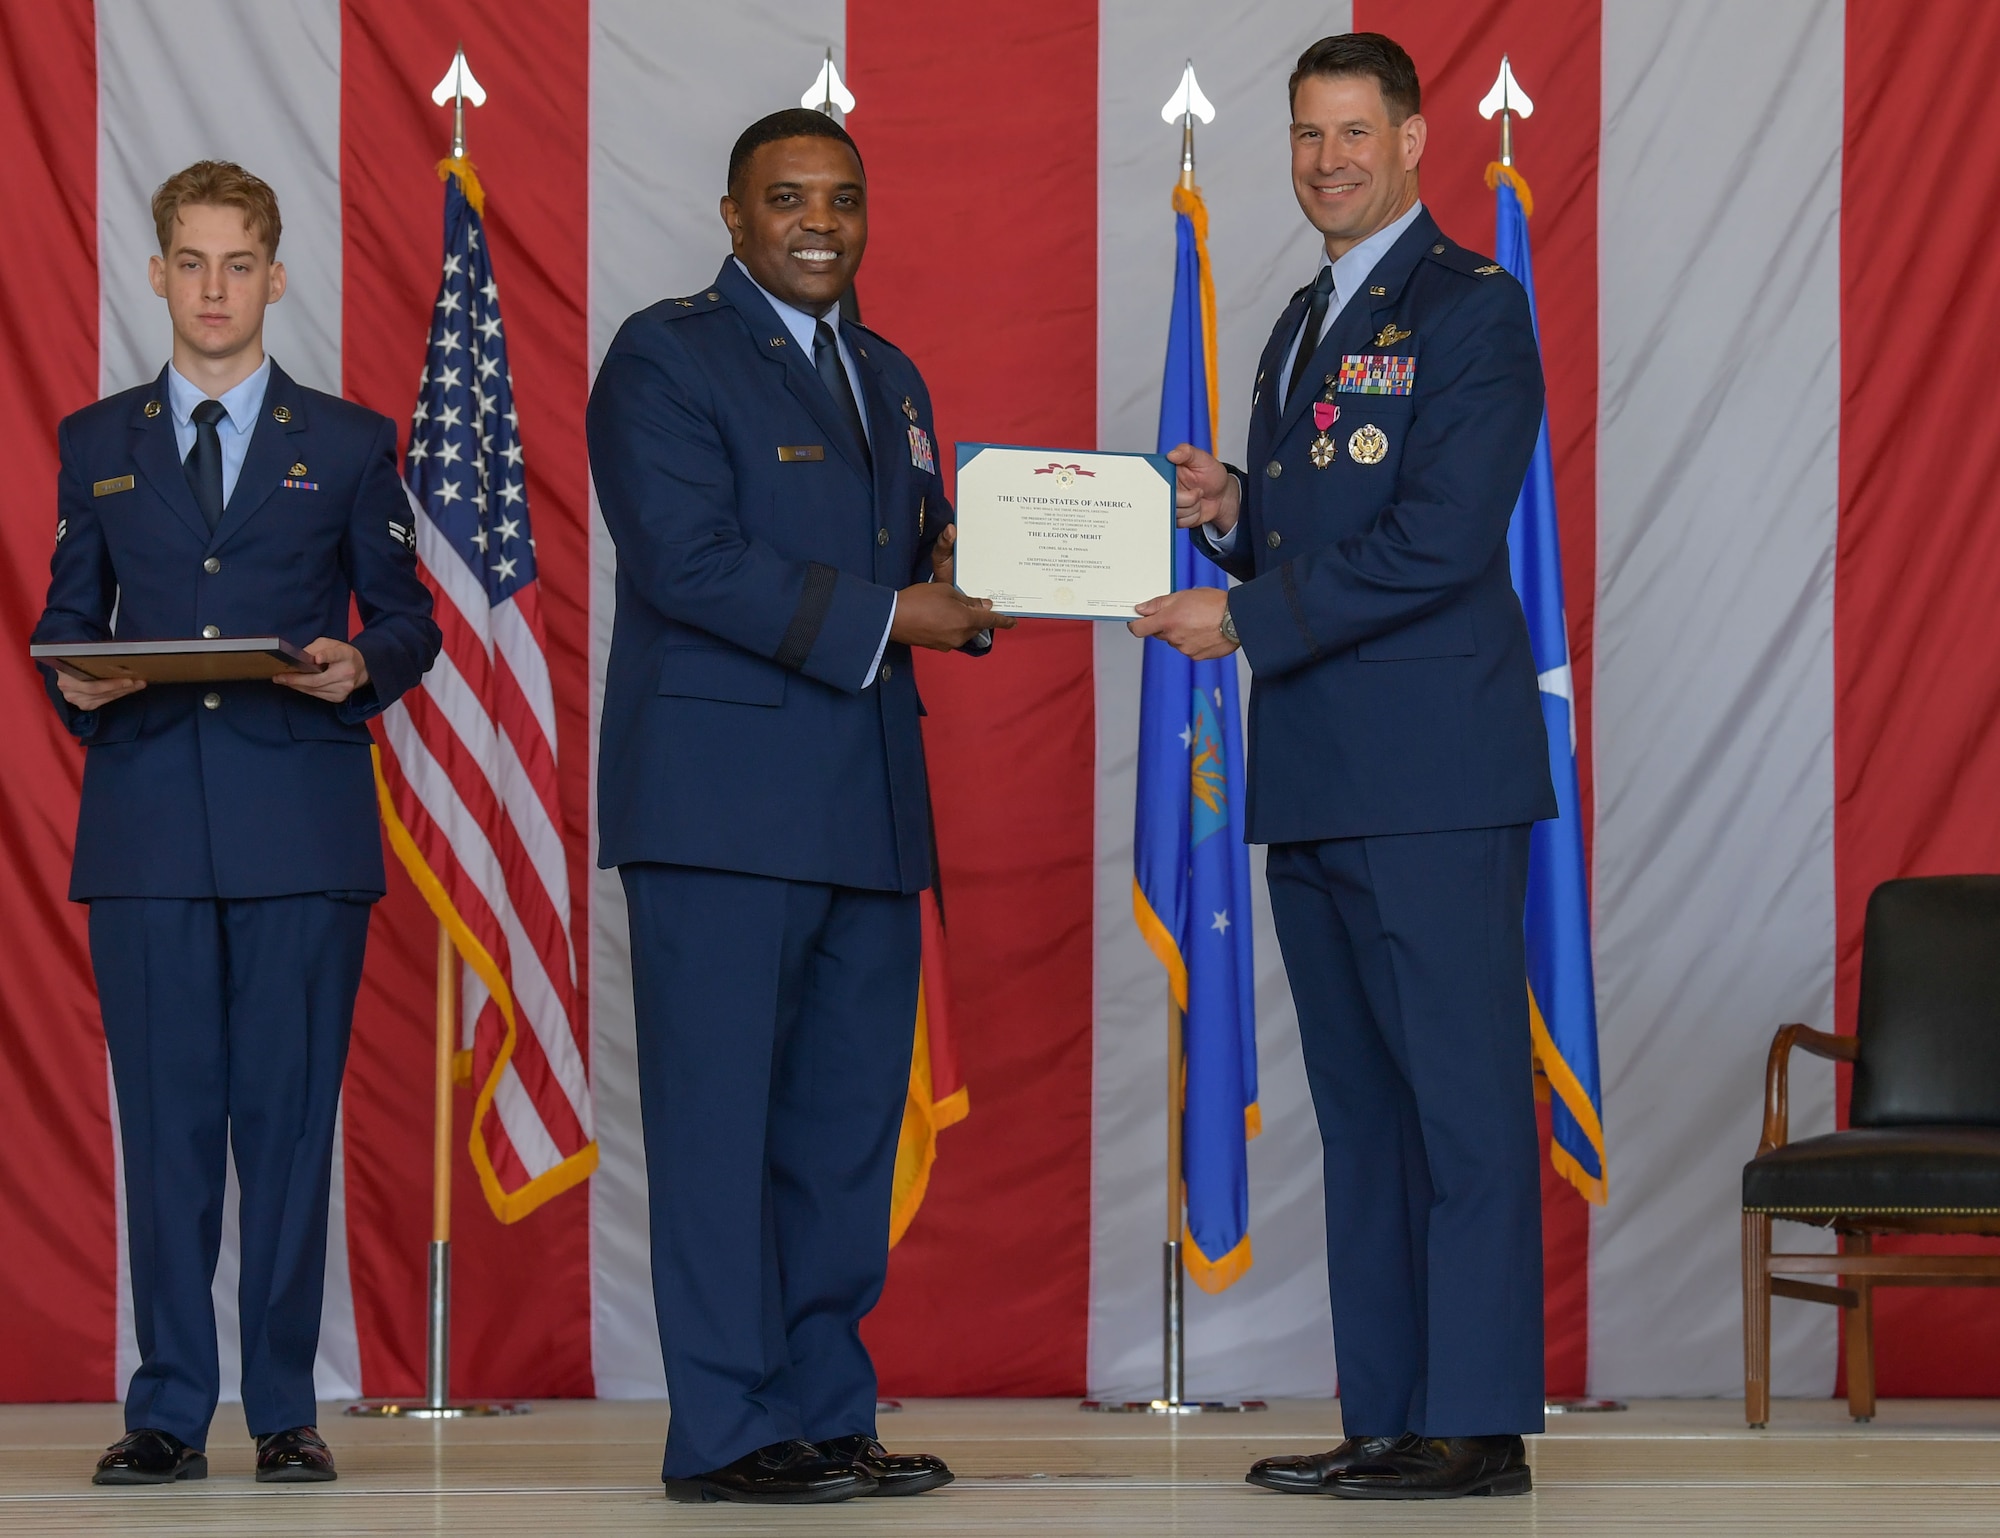 U.S. Air Force Brig. Gen. Otis C. Jones, 86th Airlift Wing commander, left, presents Col. Sean Finnan, 86th Operations Group out-going commander, right, with the legion of merit medal during the 86th OG change of command ceremony at Ramstein Air Base, Germany, June 15, 2023. Finnan received the medal for meritorious service during his time as the 86th OG commander. (U.S. Air Force photo by Airman Trevor Calvert)